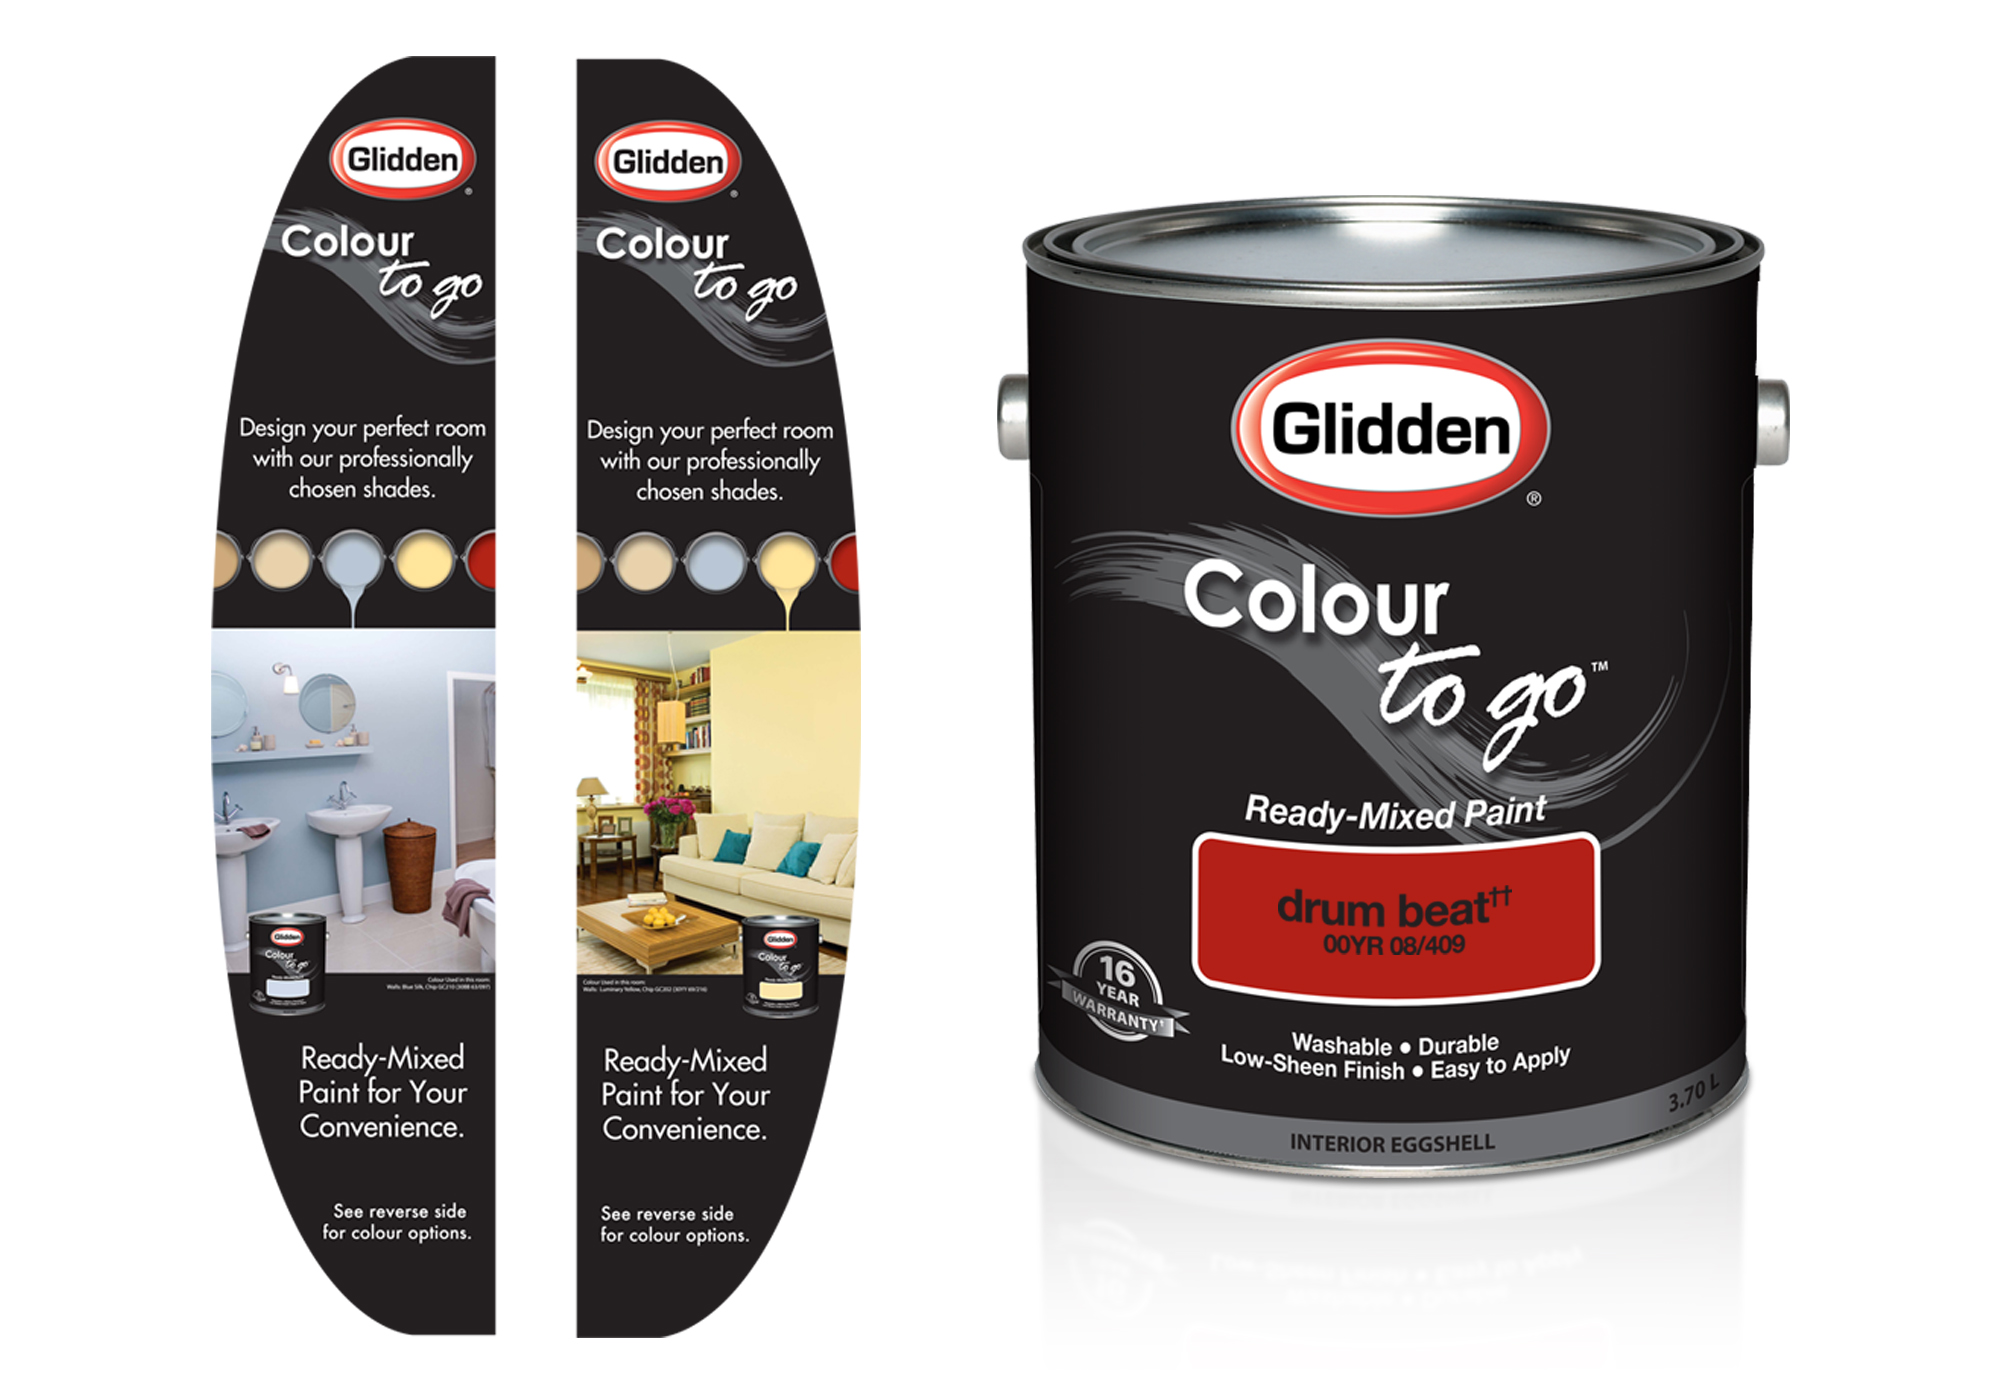 Glidden "Colour To Go" Paint Can and Signage